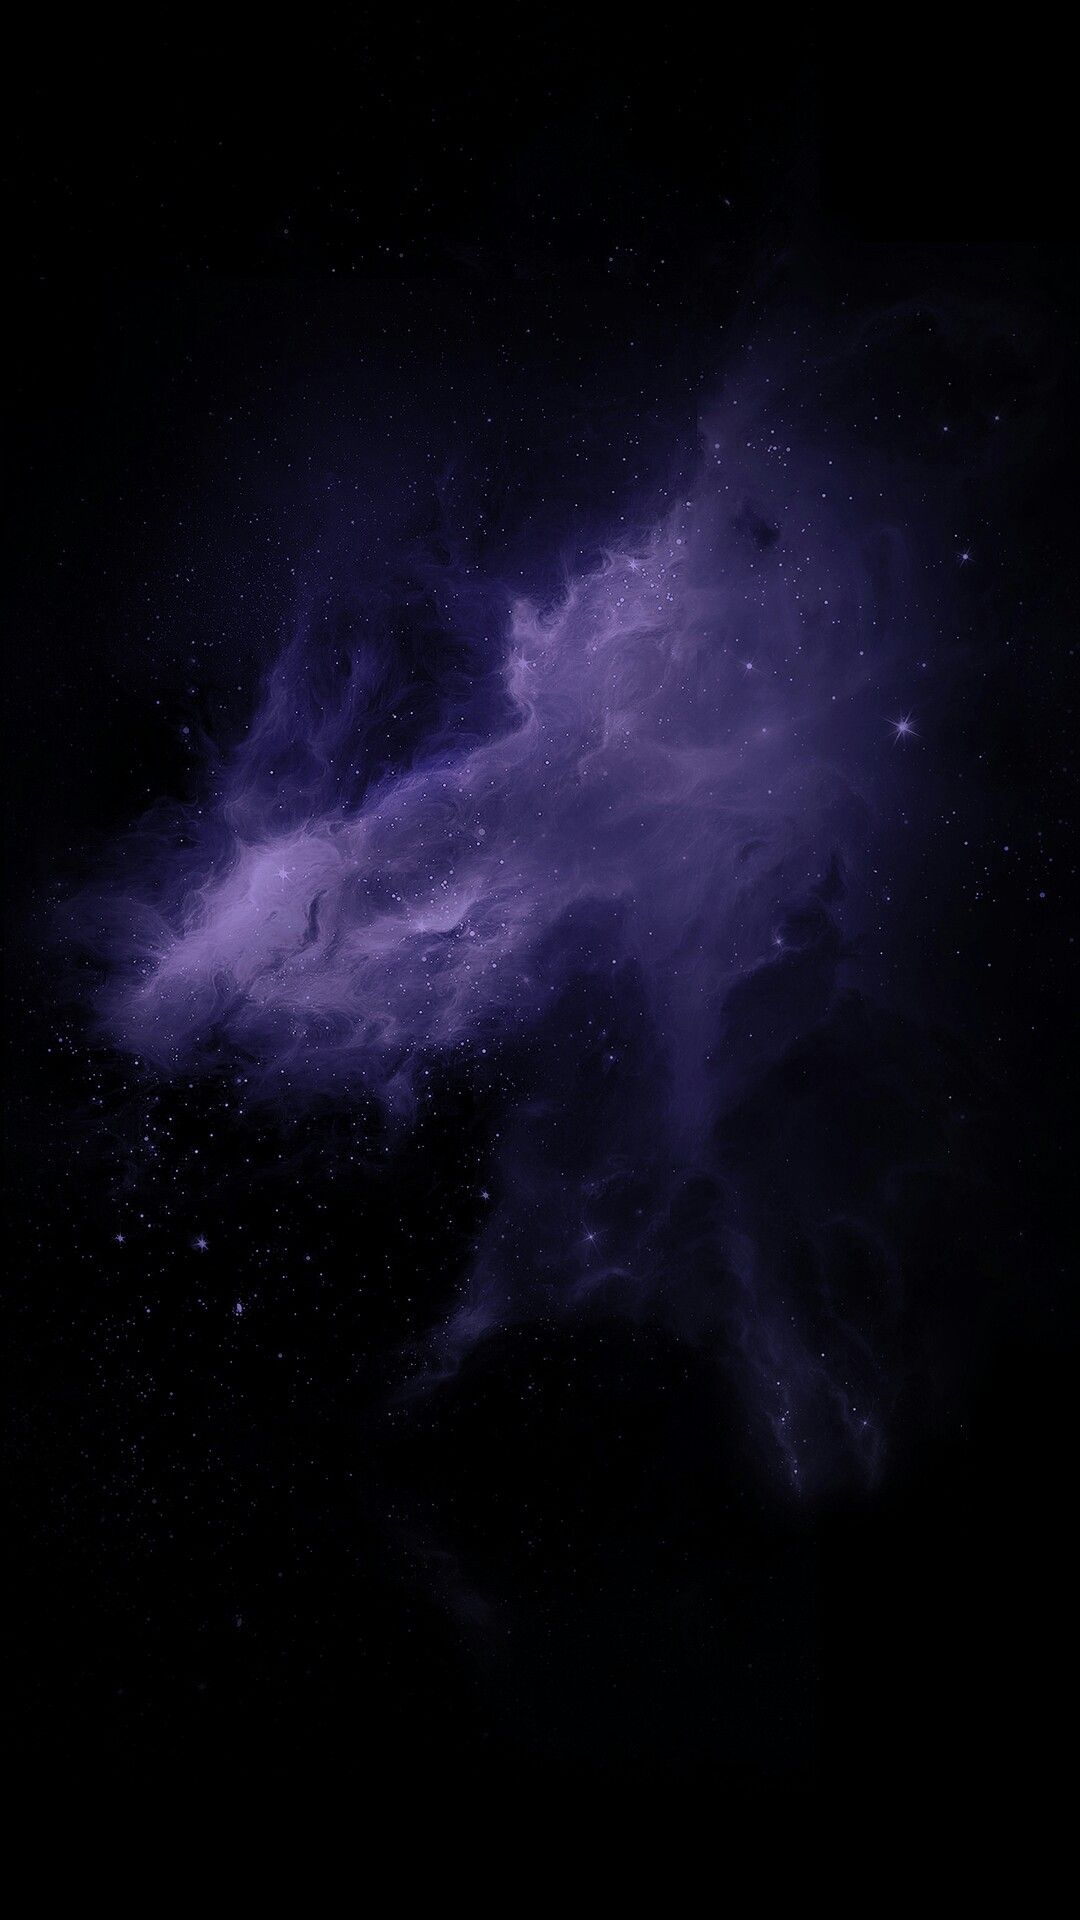 1080x1920 Purple Space Wallpaper Abstract Iphone Wallpaper Planets Wallpaper Wallpaper Space